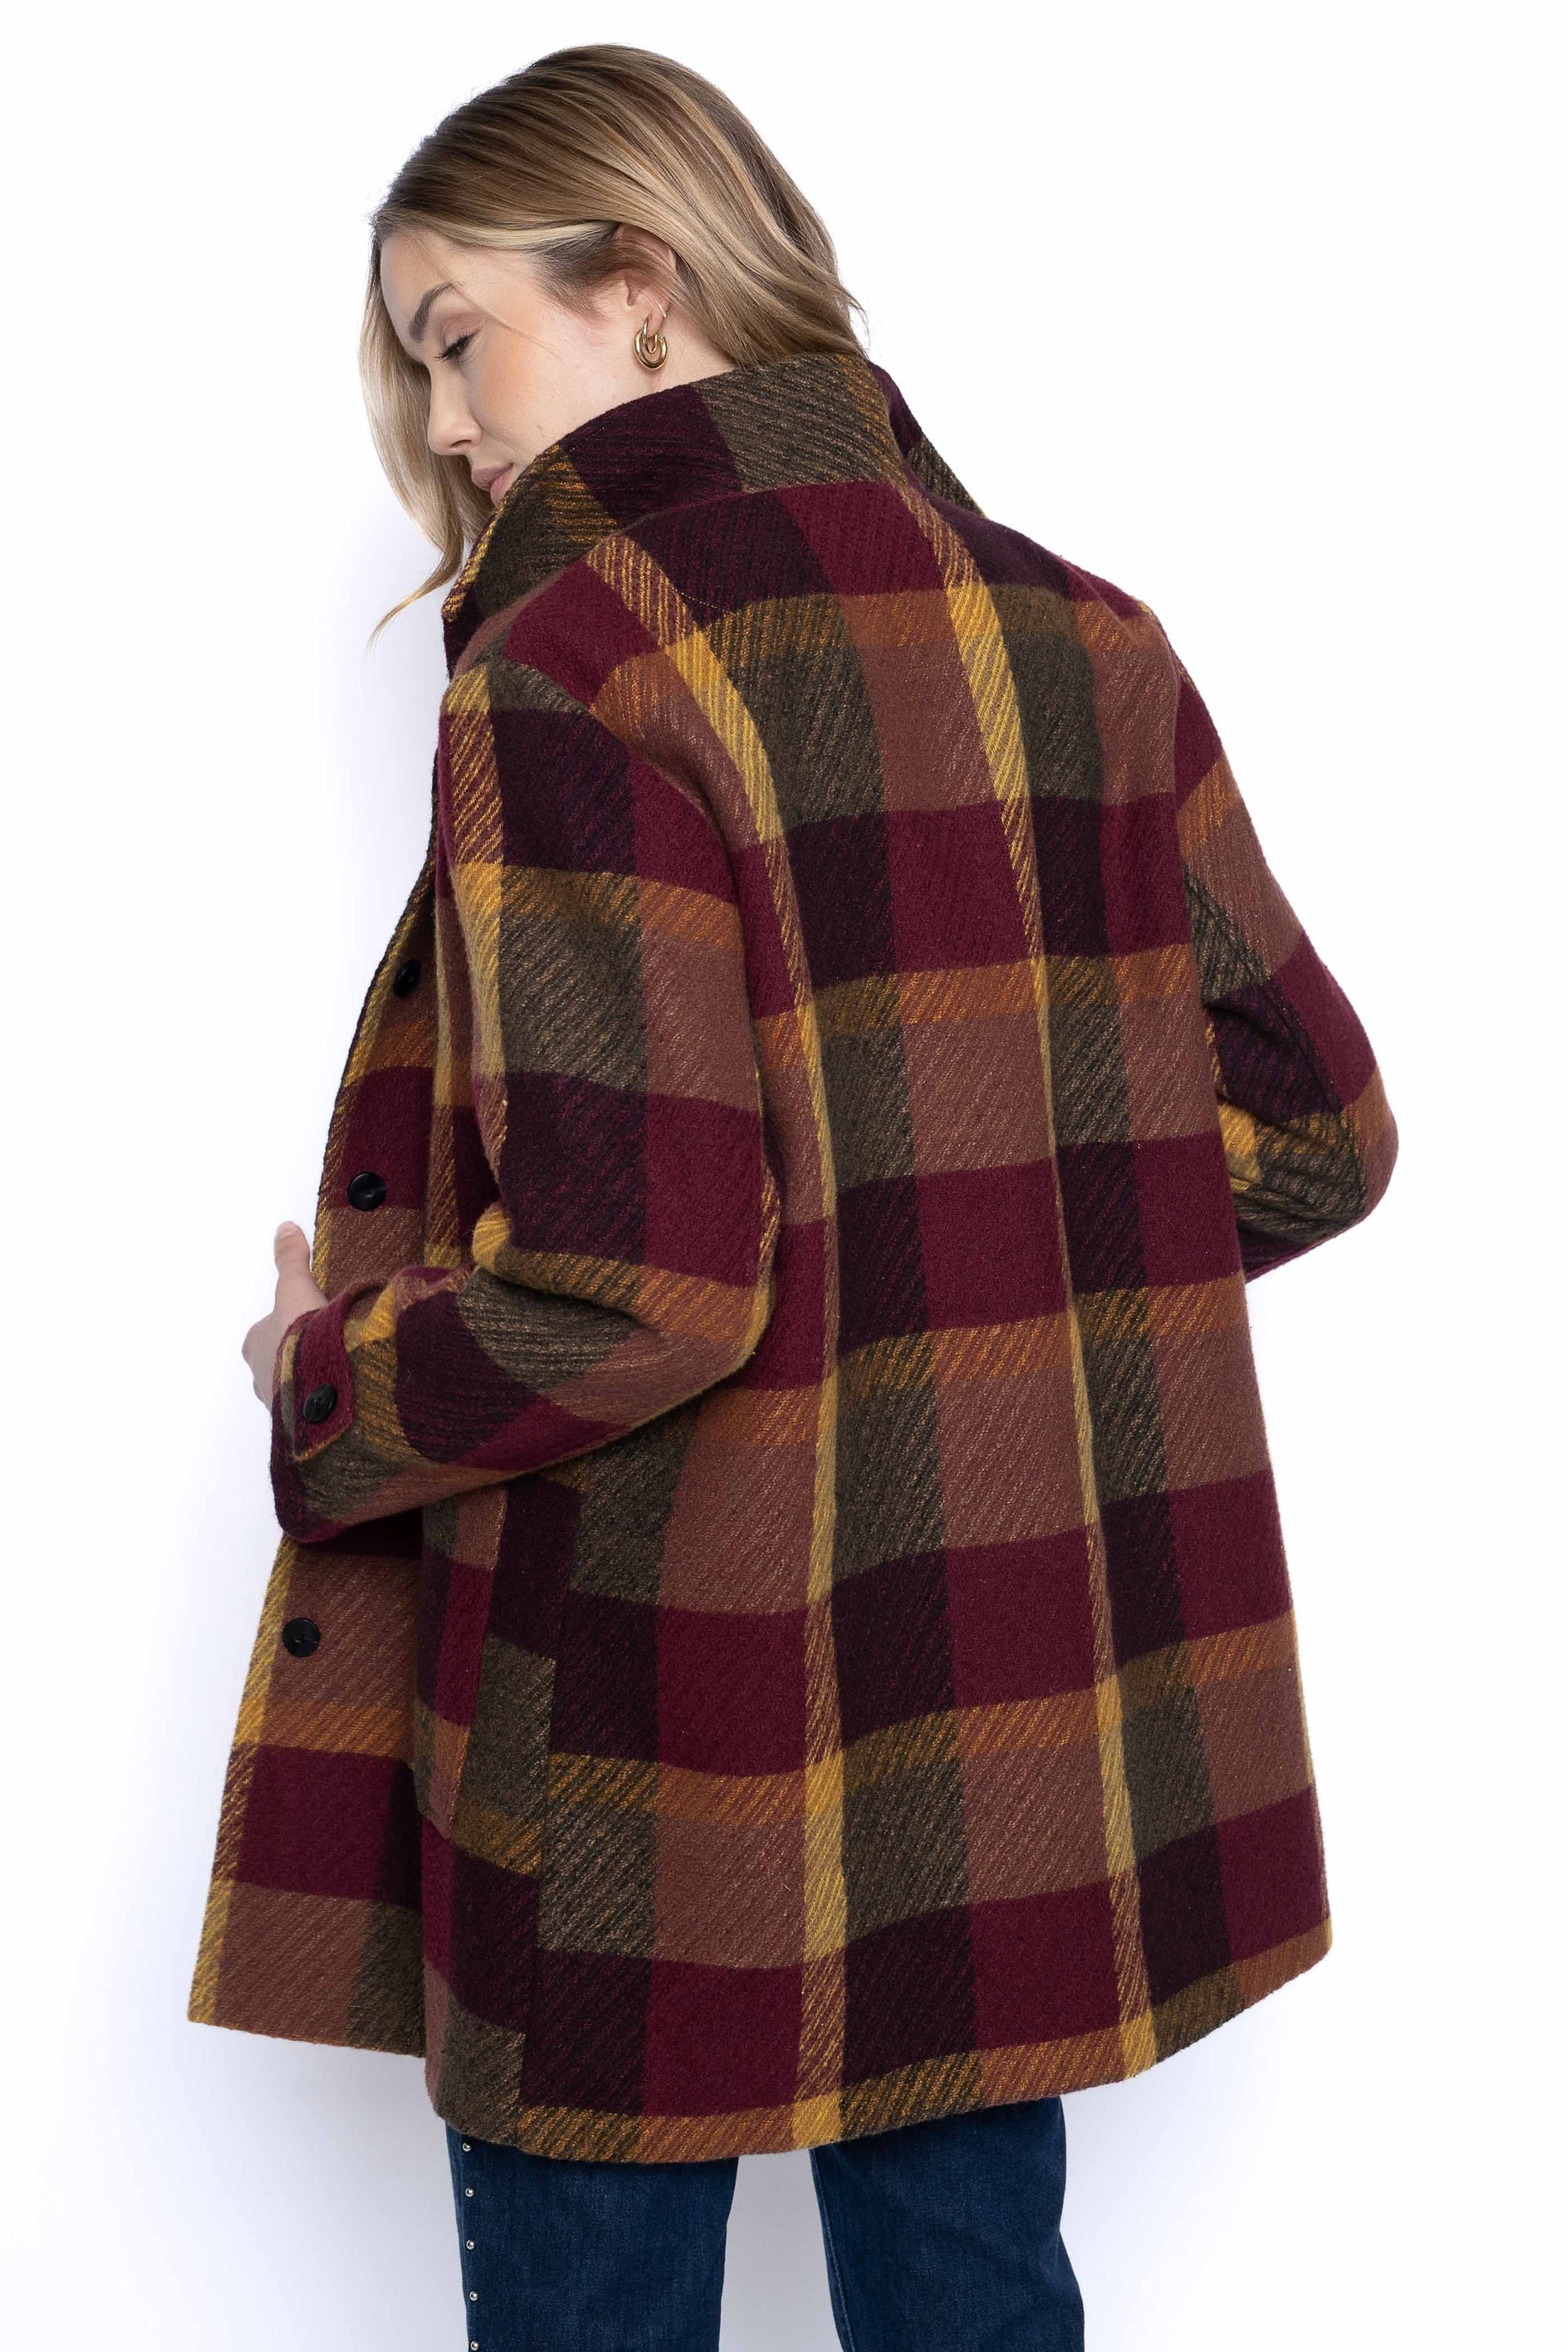 Stand Collar Plaid Jacket. Back view.